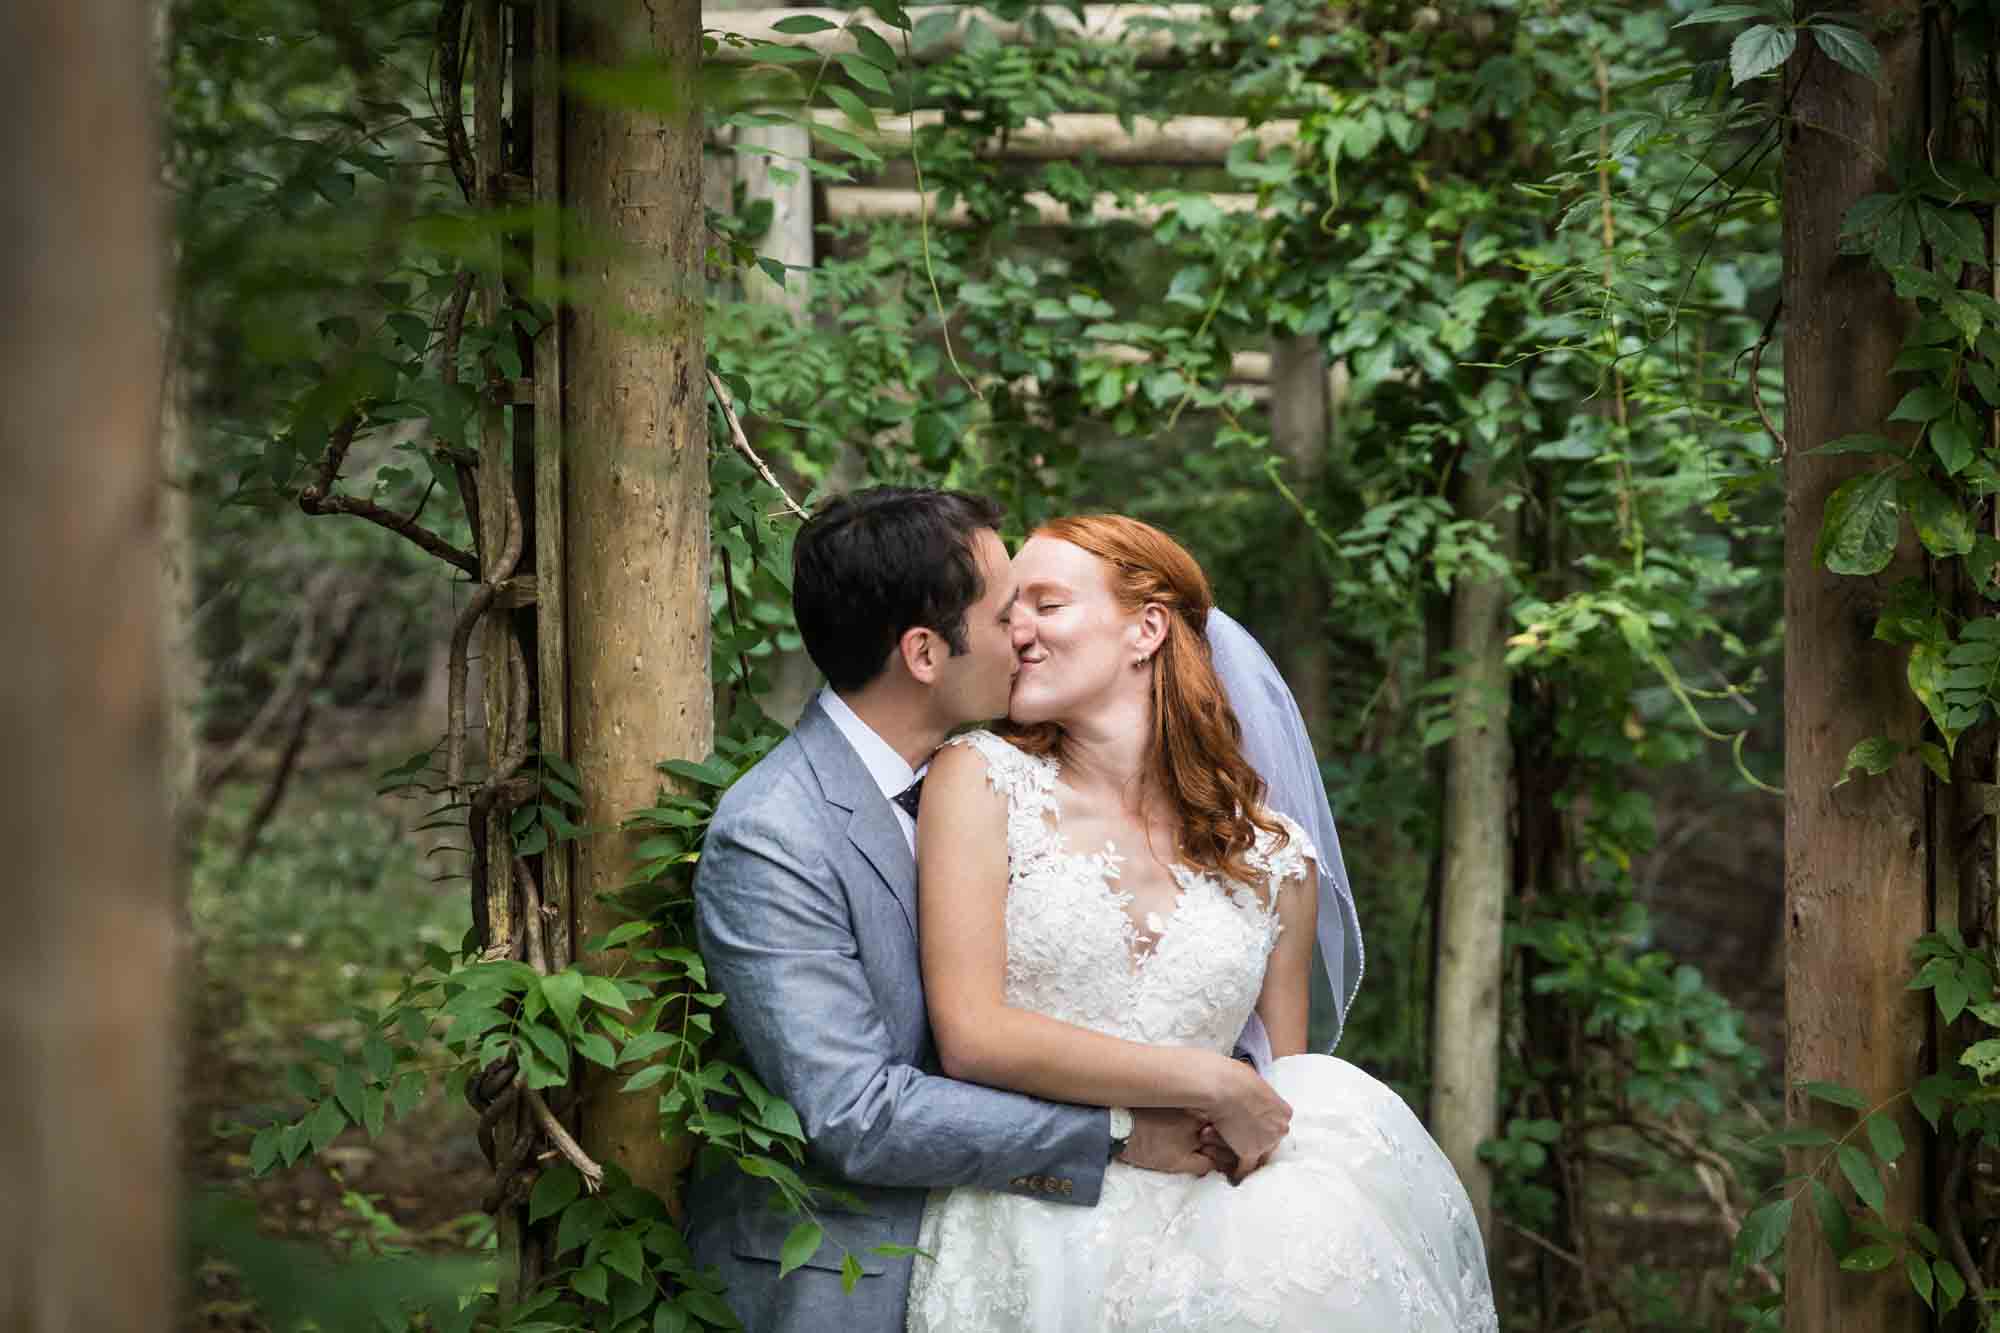 Bride and groom kissing in forest for an article on backyard wedding tips